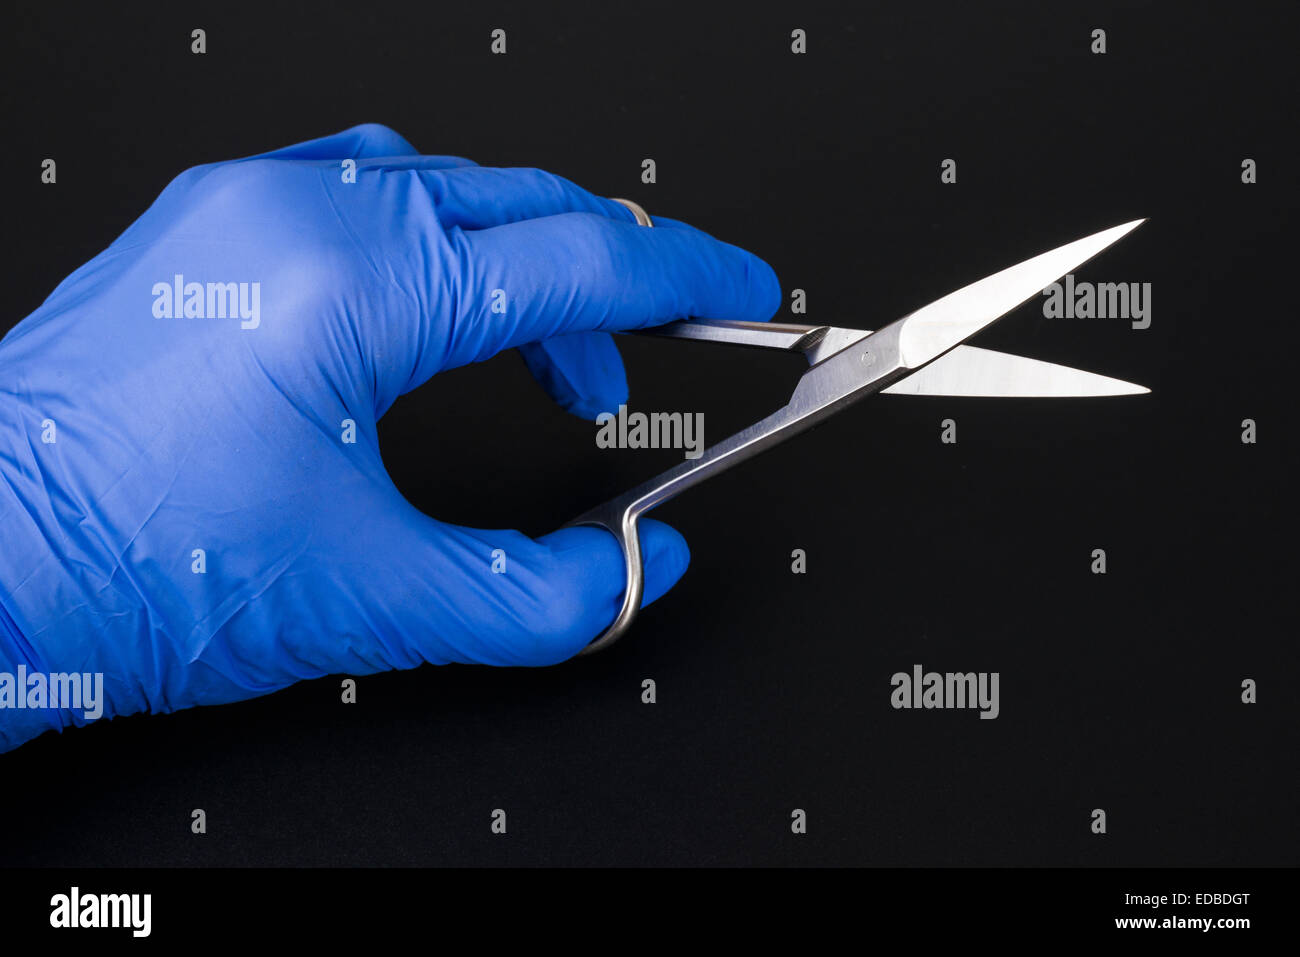 A hand with a blue medical glove is holding a pair of scissors Stock Photo